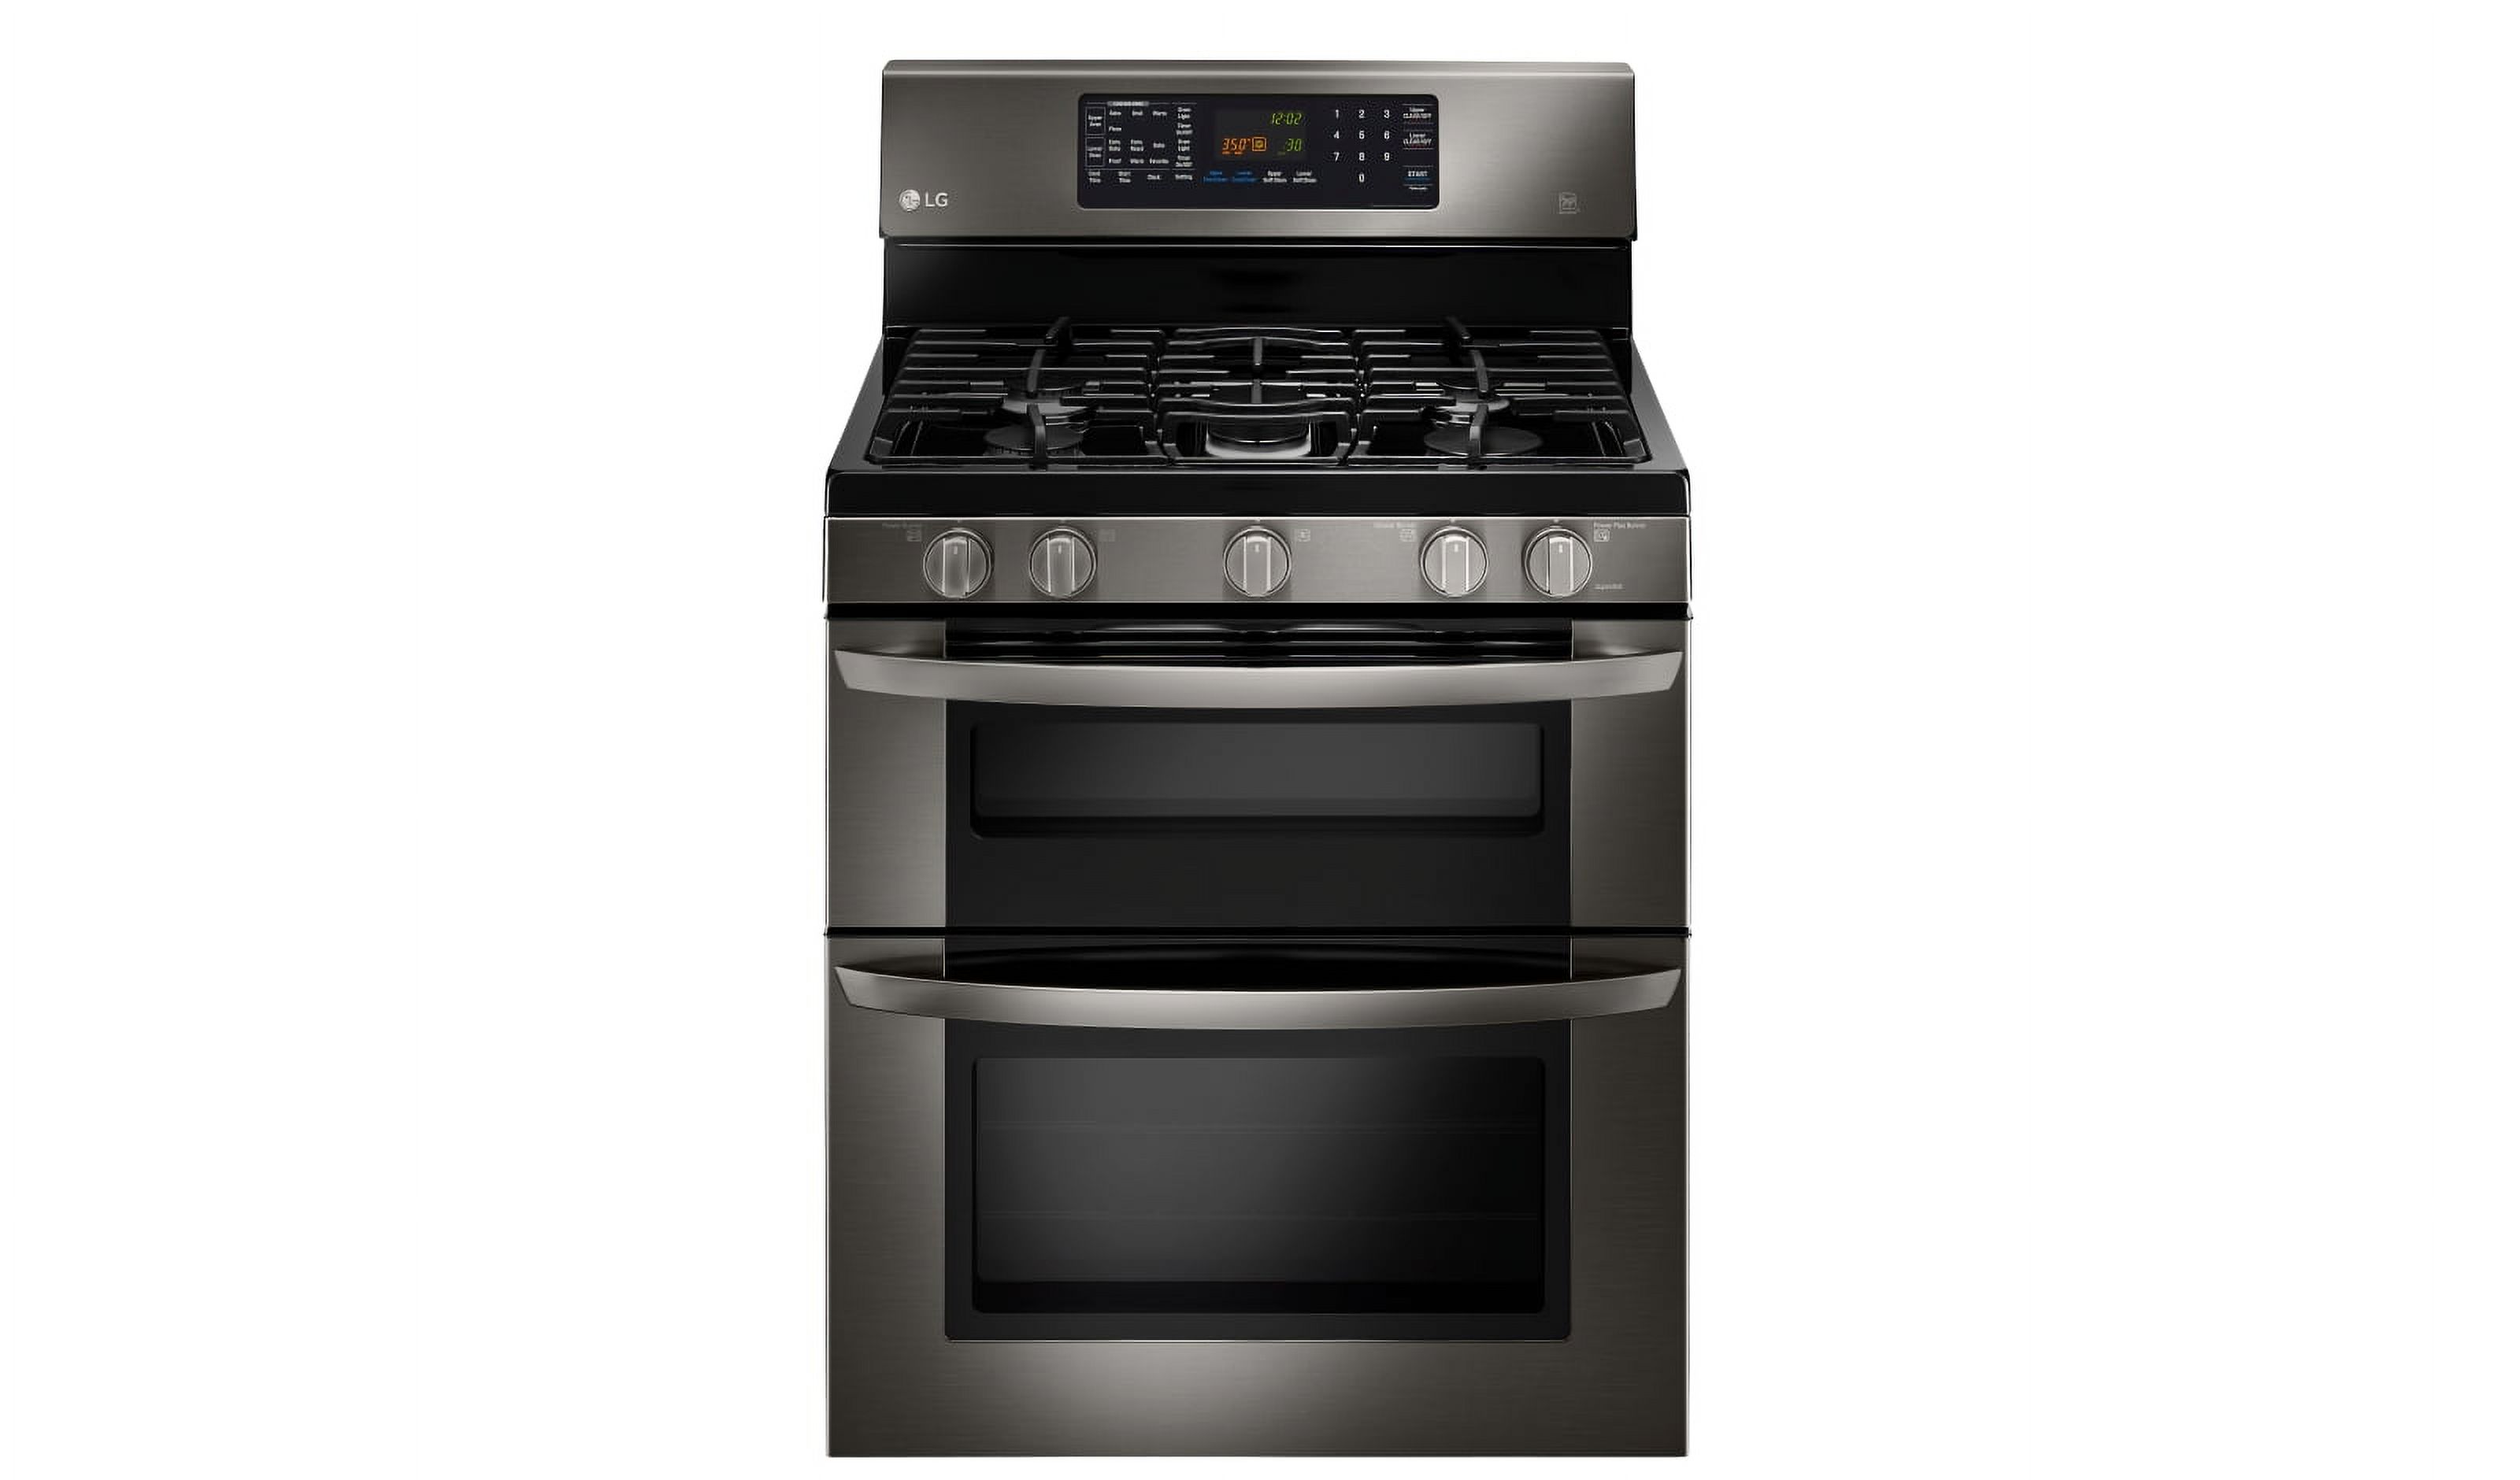 Black Stainless Steel Series 2.2 cu.ft. Over-the-Range Microwave Oven - image 4 of 4